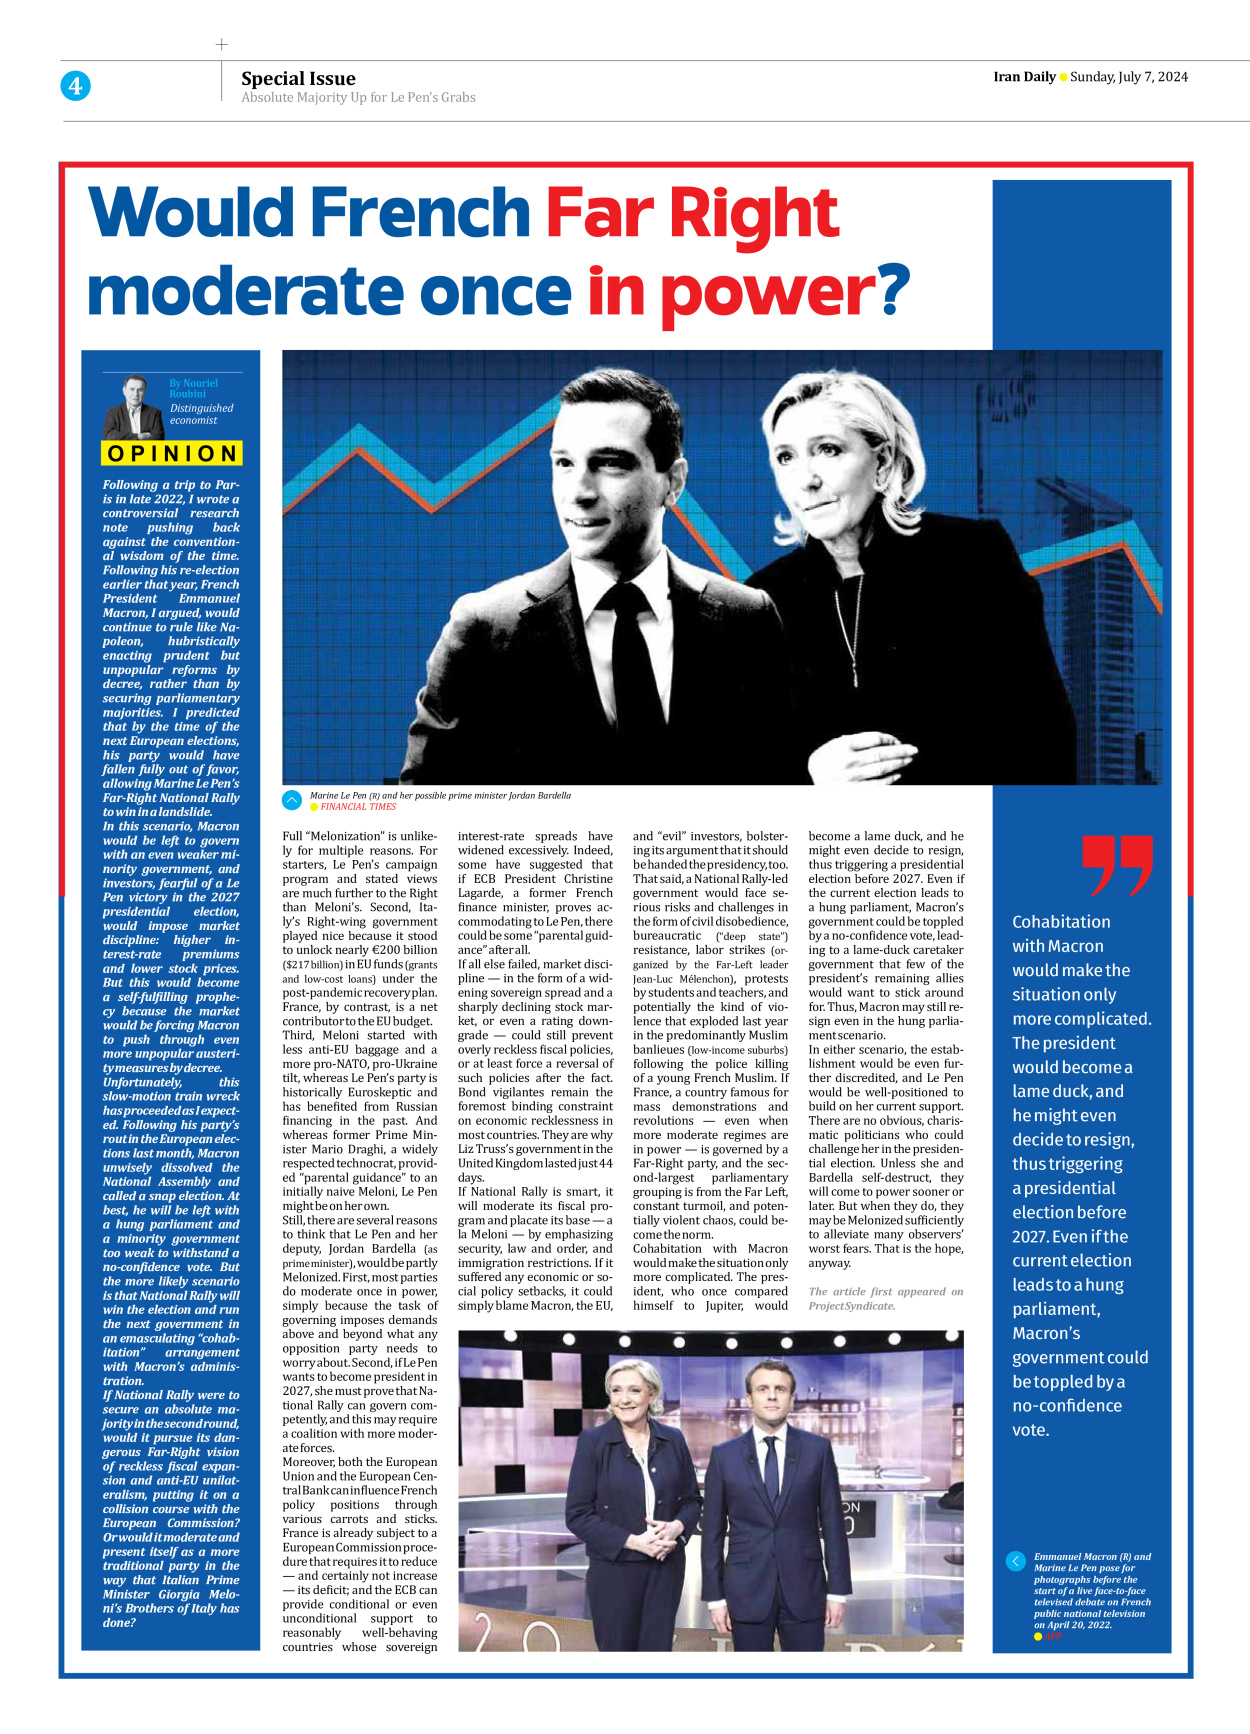 Iran Daily - Number Seven Thousand Five Hundred and Ninety Eight - 07 July 2024 - Page 4